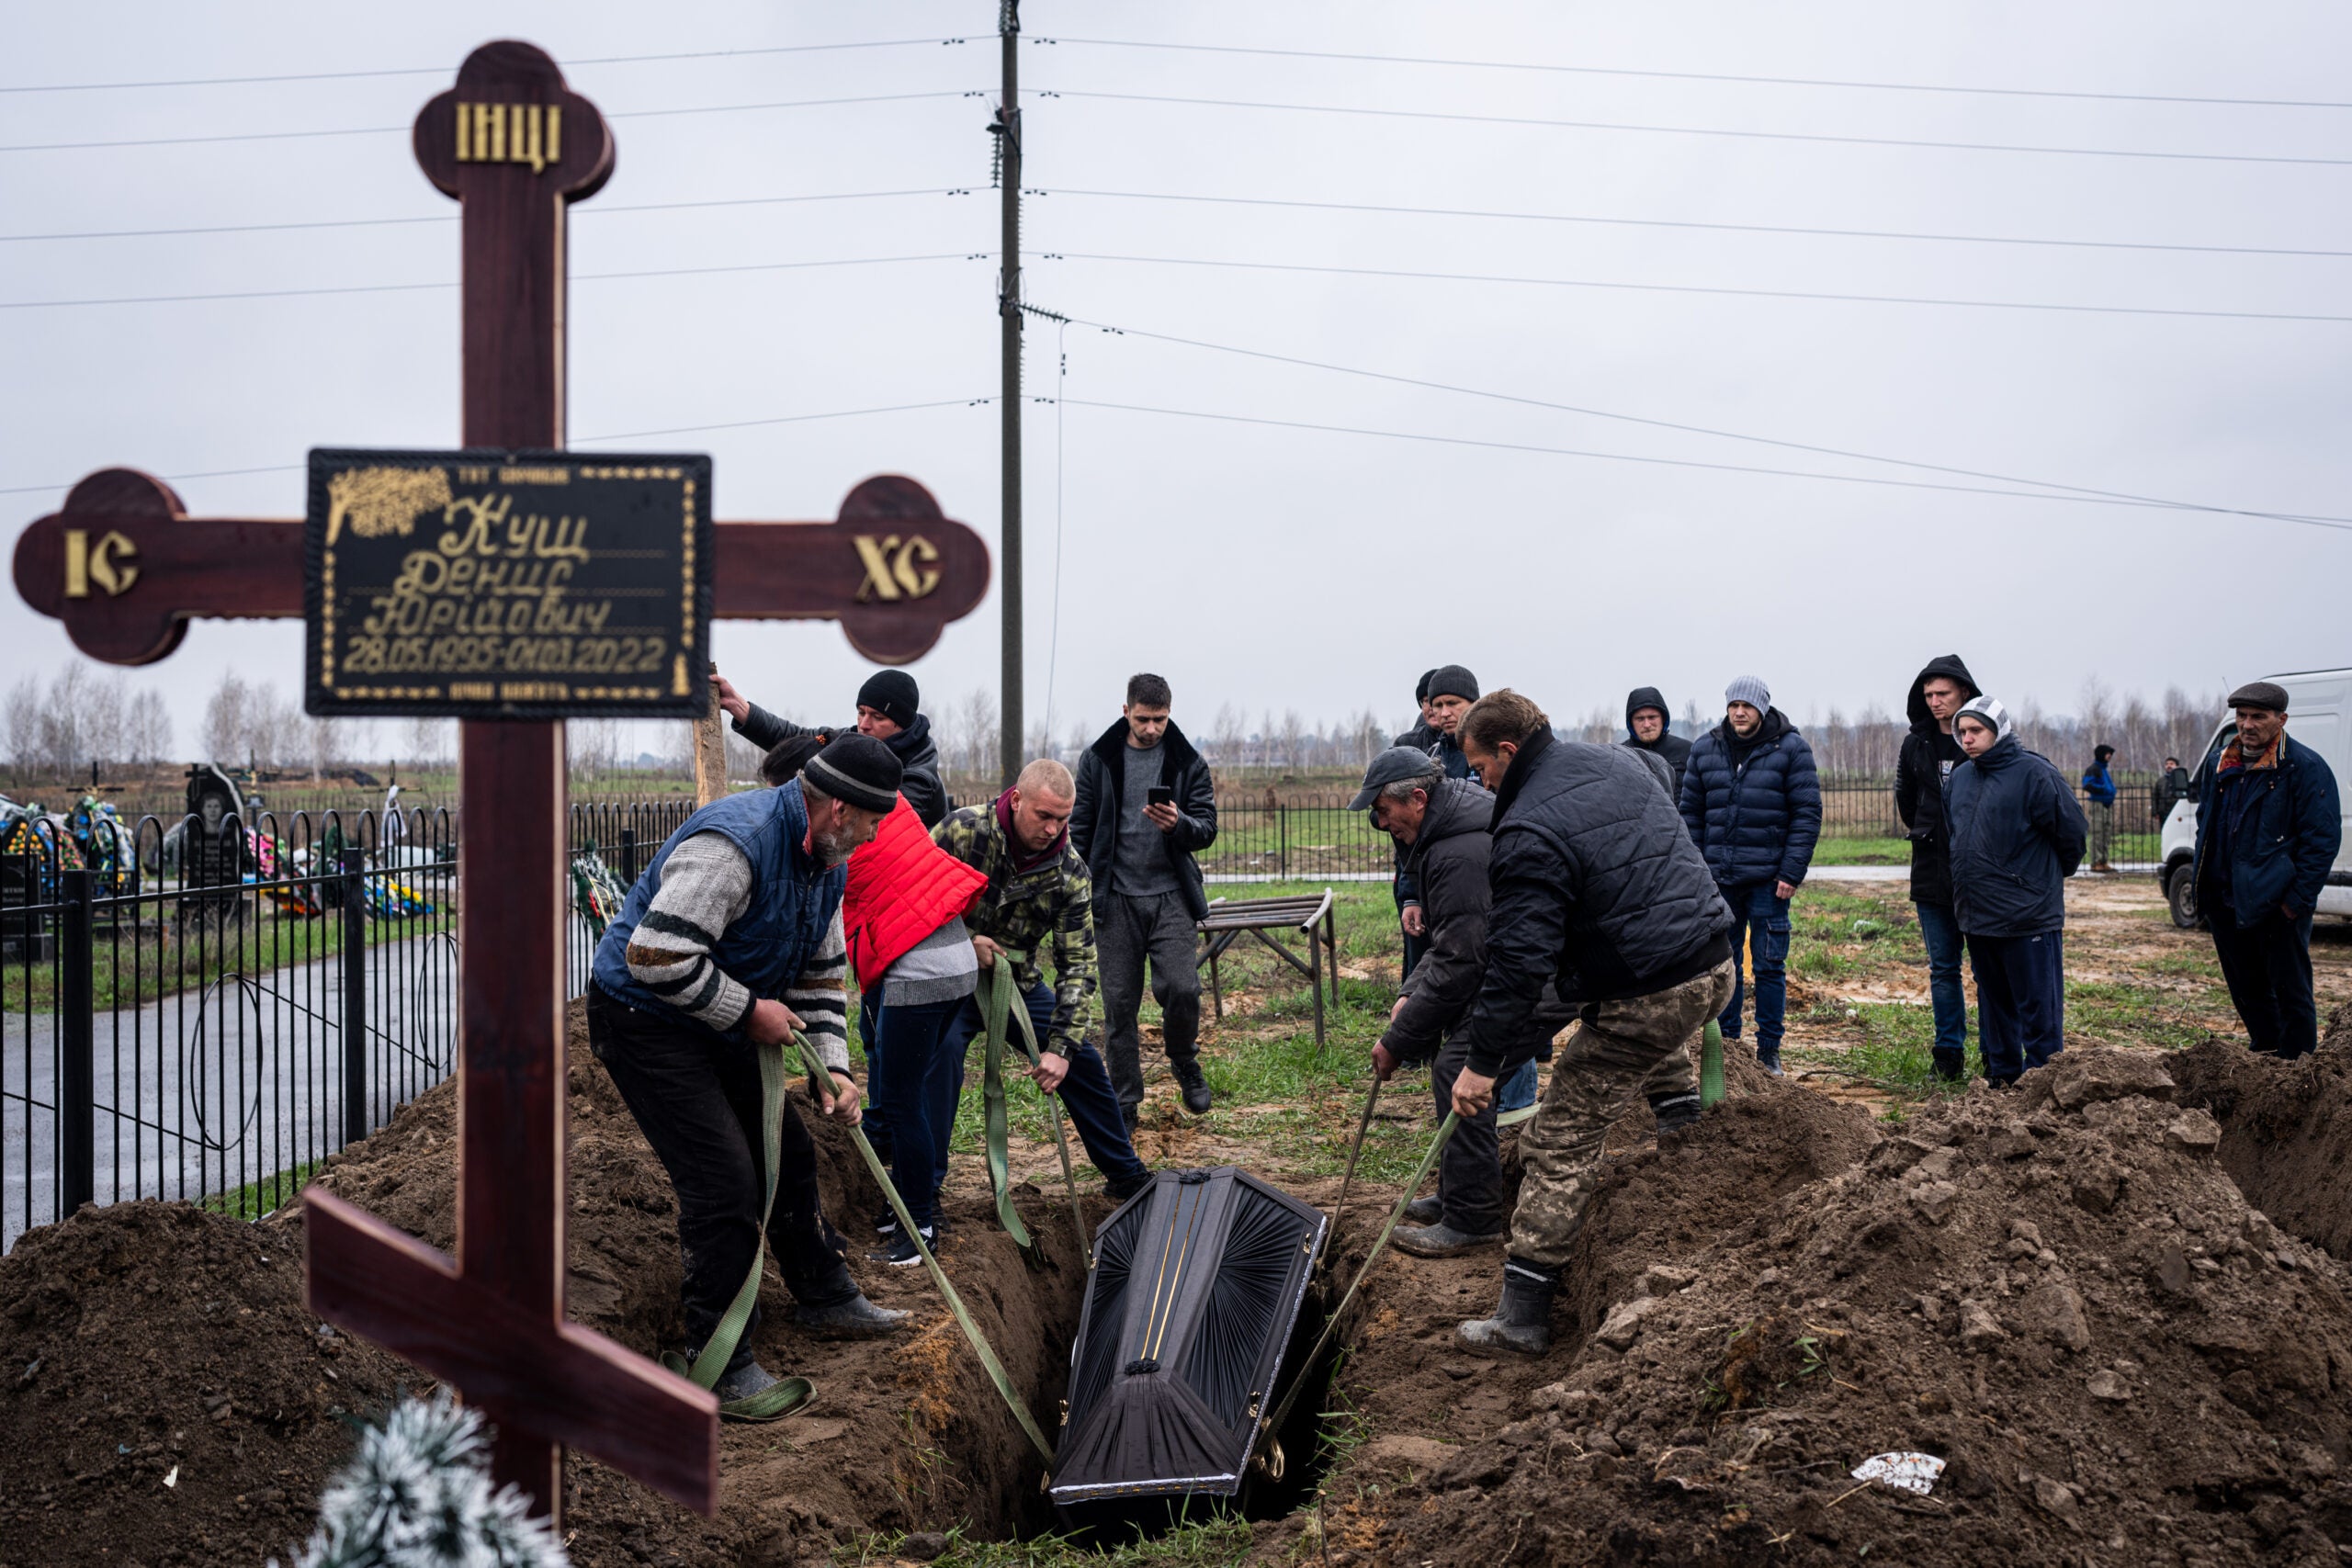 KYIV, UKRAINE - APRIL 22: Cemetery workers dig graves and bury civilians who were killed during the Russian attacks in Bucha, Ukraine on April 22, 2022 (Photo by Wolfgang Schwan/Anadolu Agency via Getty Images)